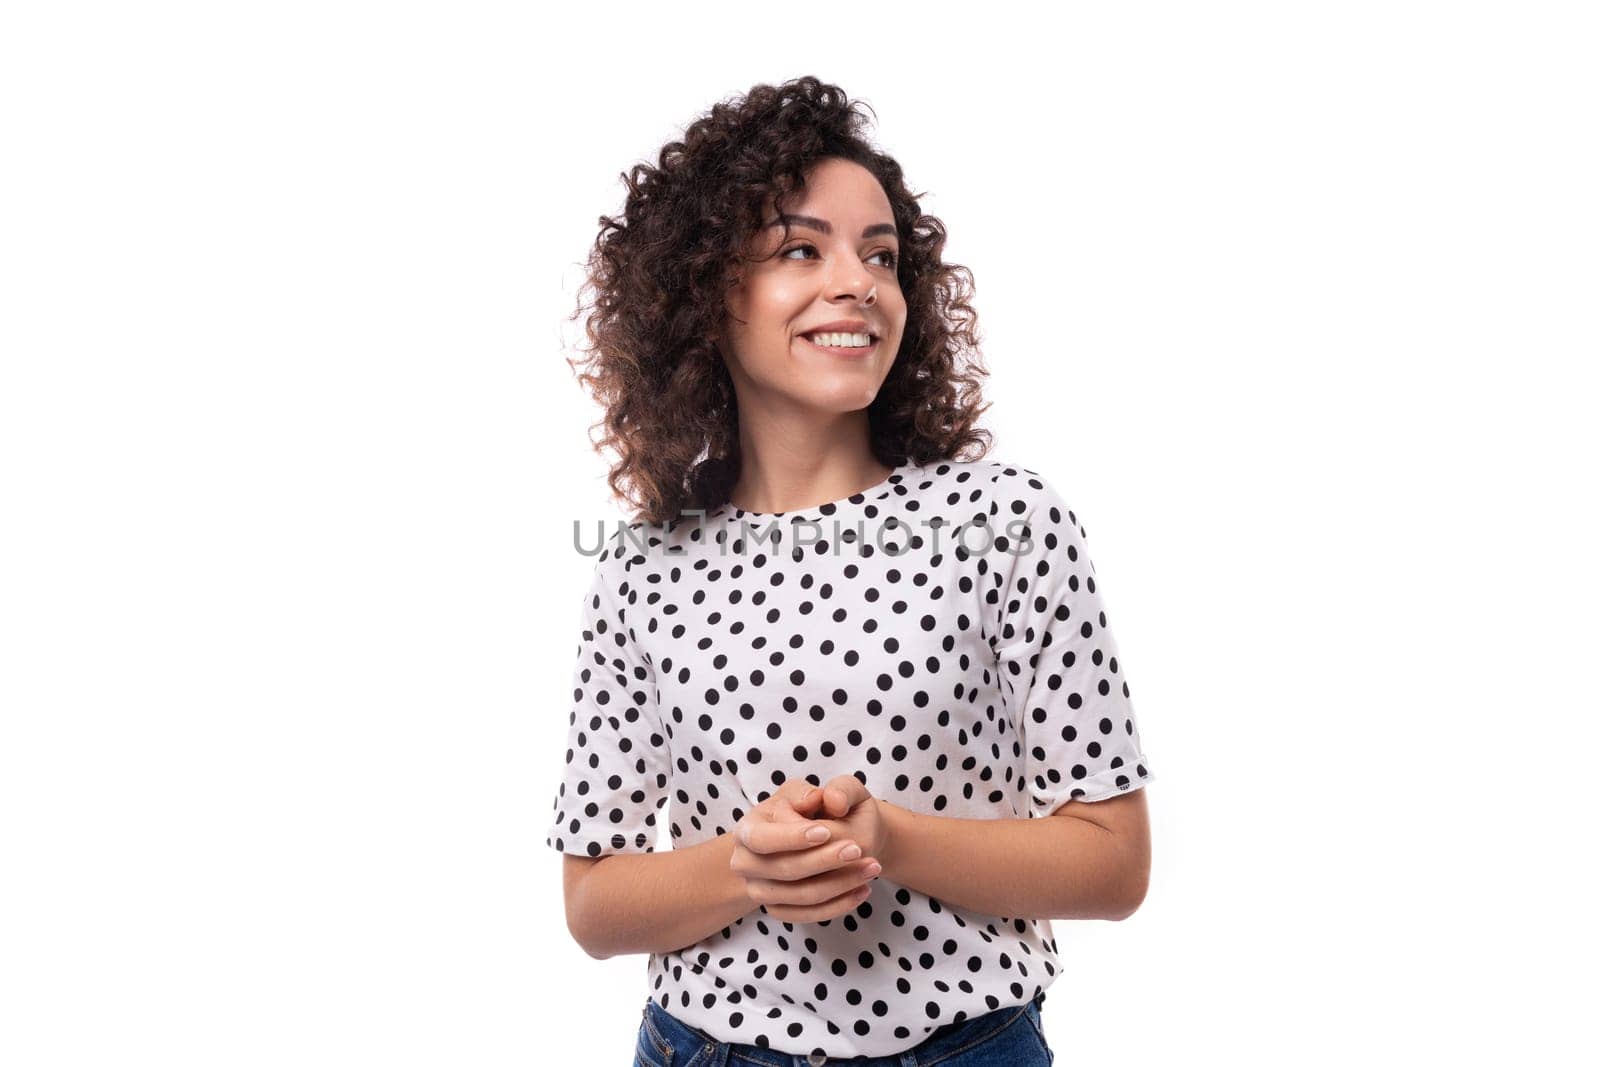 young leader woman with curly hairstyle dressed in summer blouse with polka dot print feels confident.